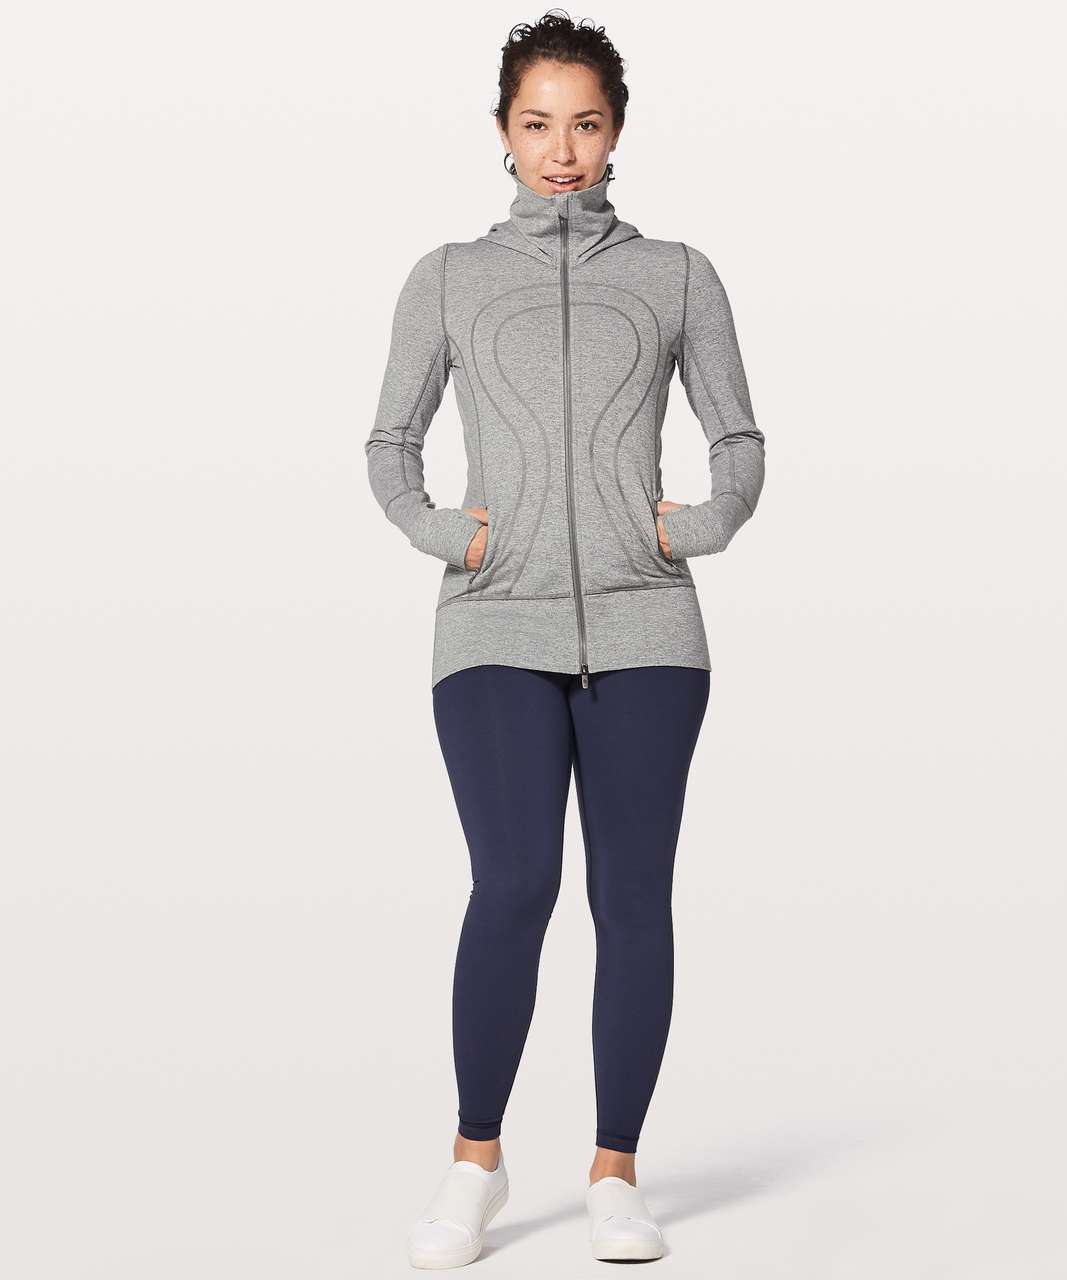 Lululemon In Stride Jacket - Heathered Fossil / Blurred Blossoms